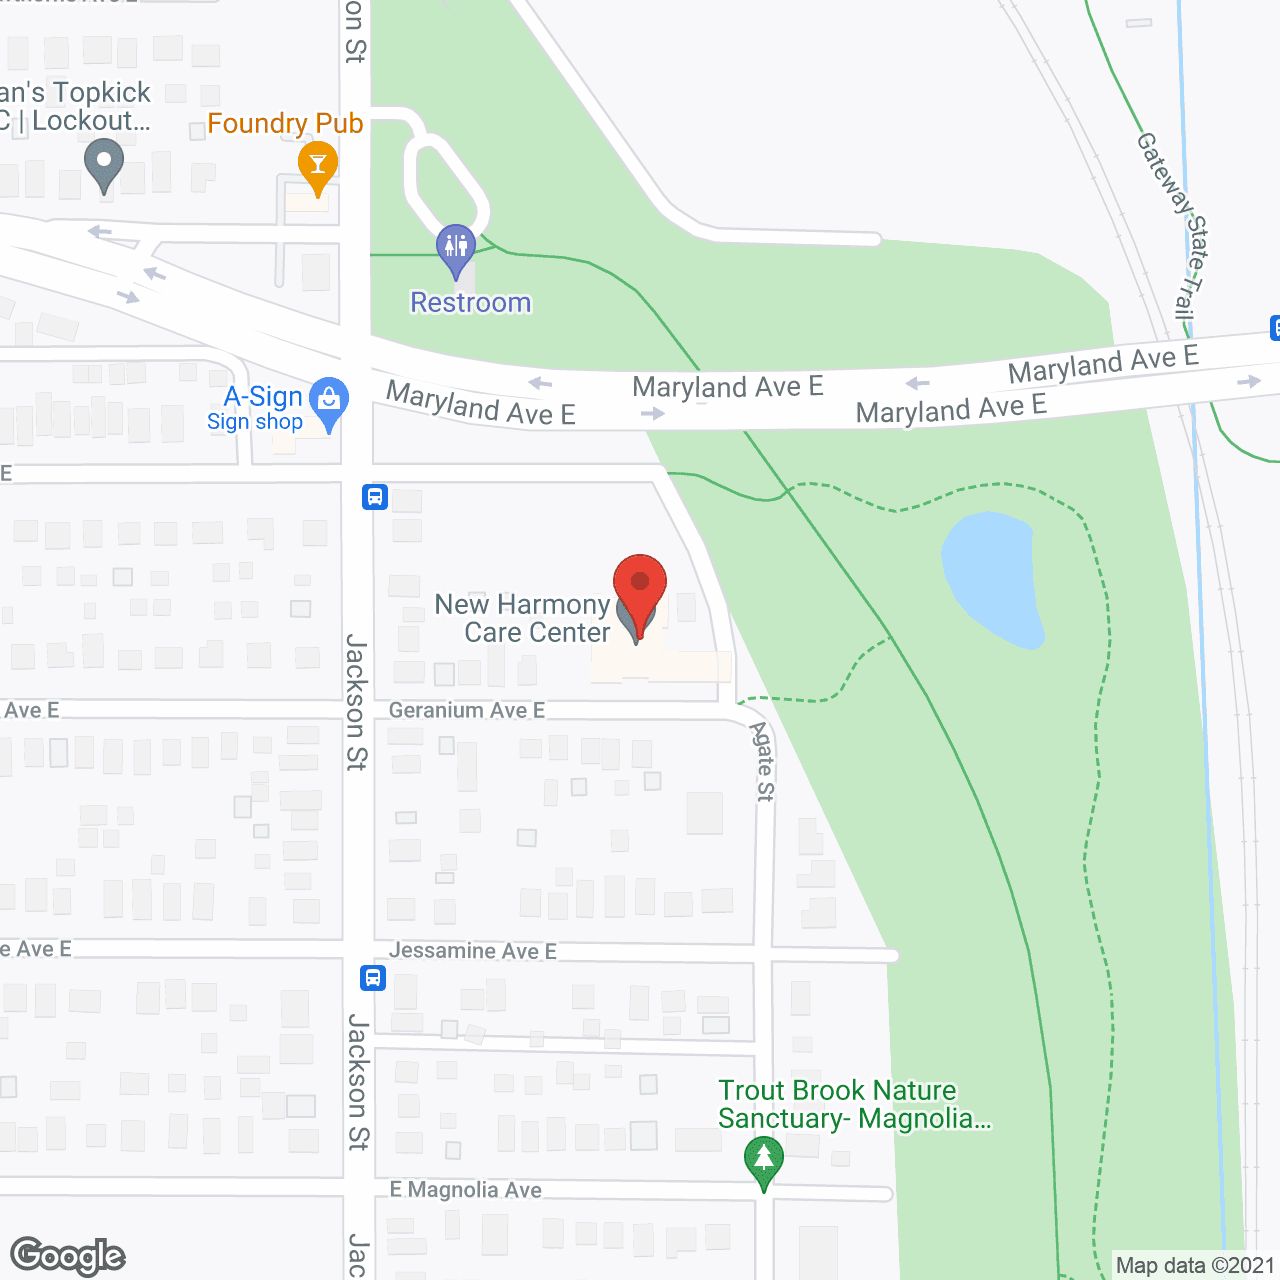 New Harmony Care Ctr in google map